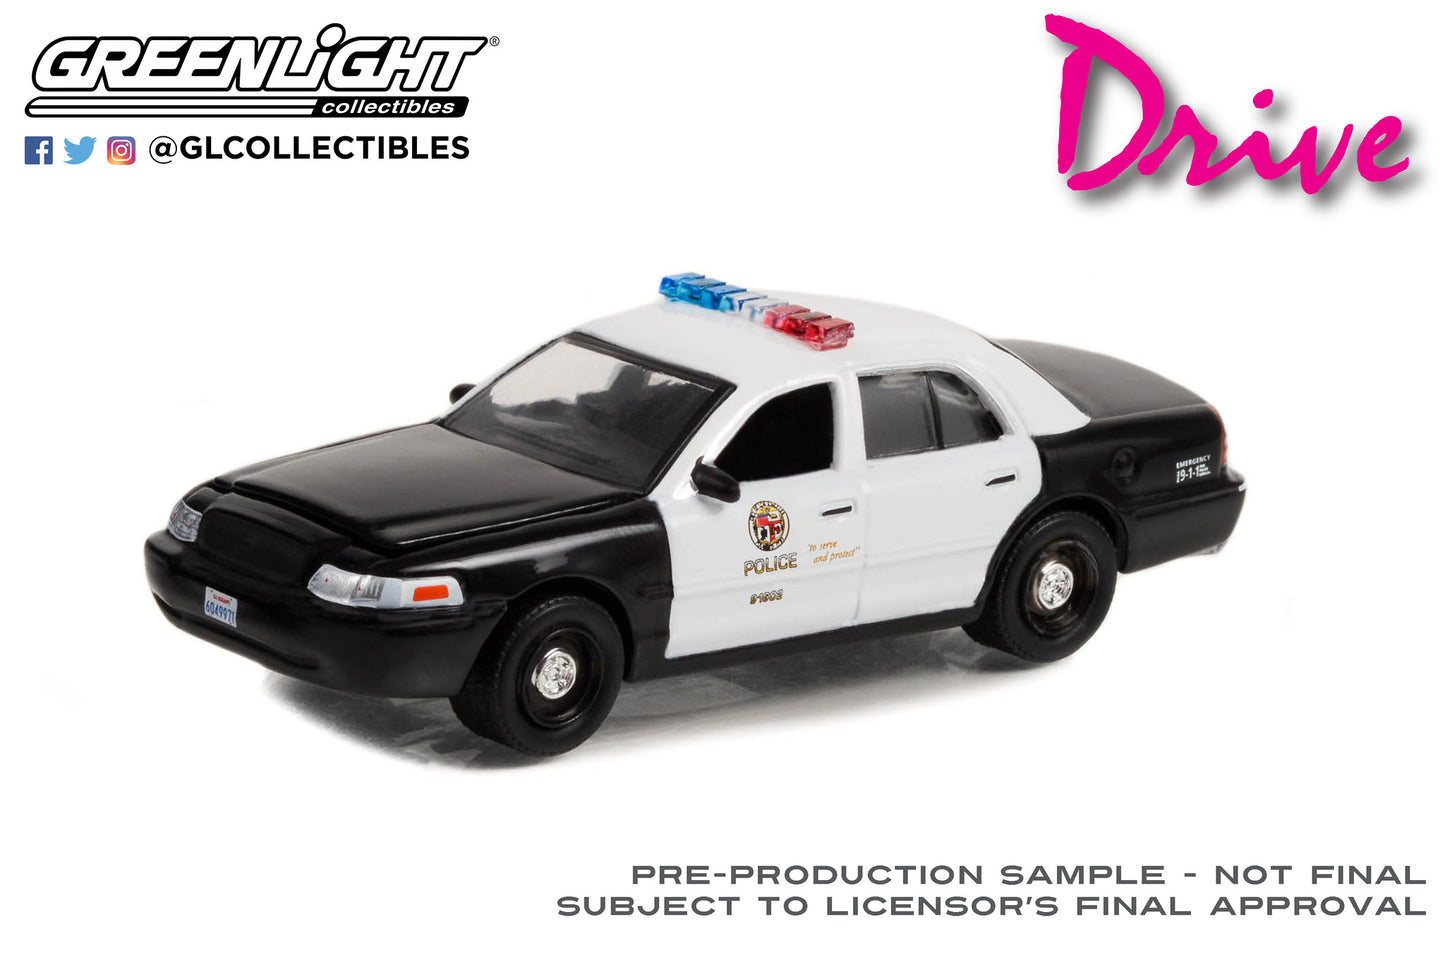 GreenLight 1:64 Hollywood Series 37 - Drive (2011) - 2001 Ford Crown Victoria Police Interceptor - Los Angeles Police Department (LAPD) 44970-E